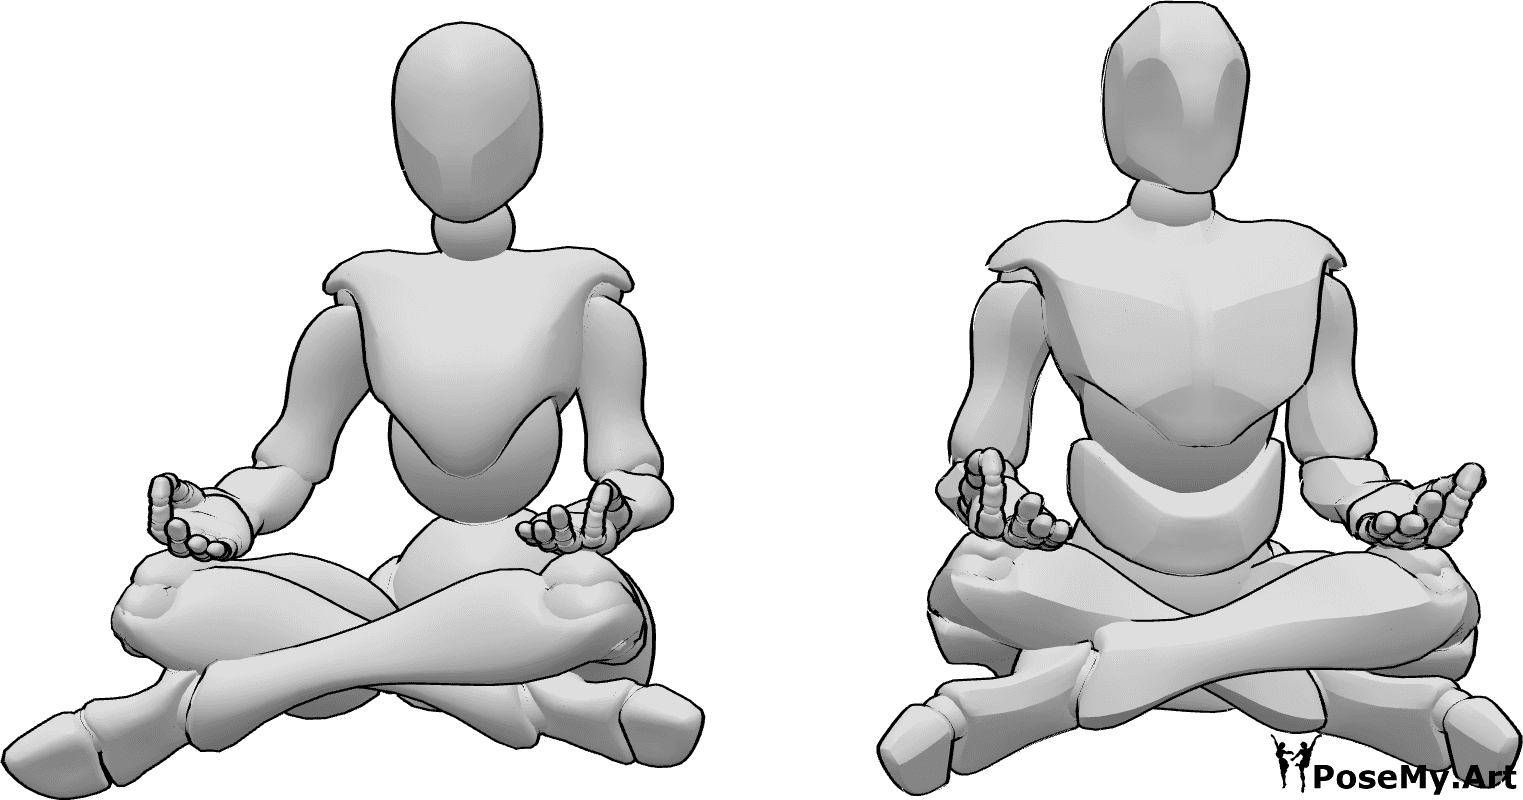 Sitting cross legged Drawing Reference and Sketches for Artists